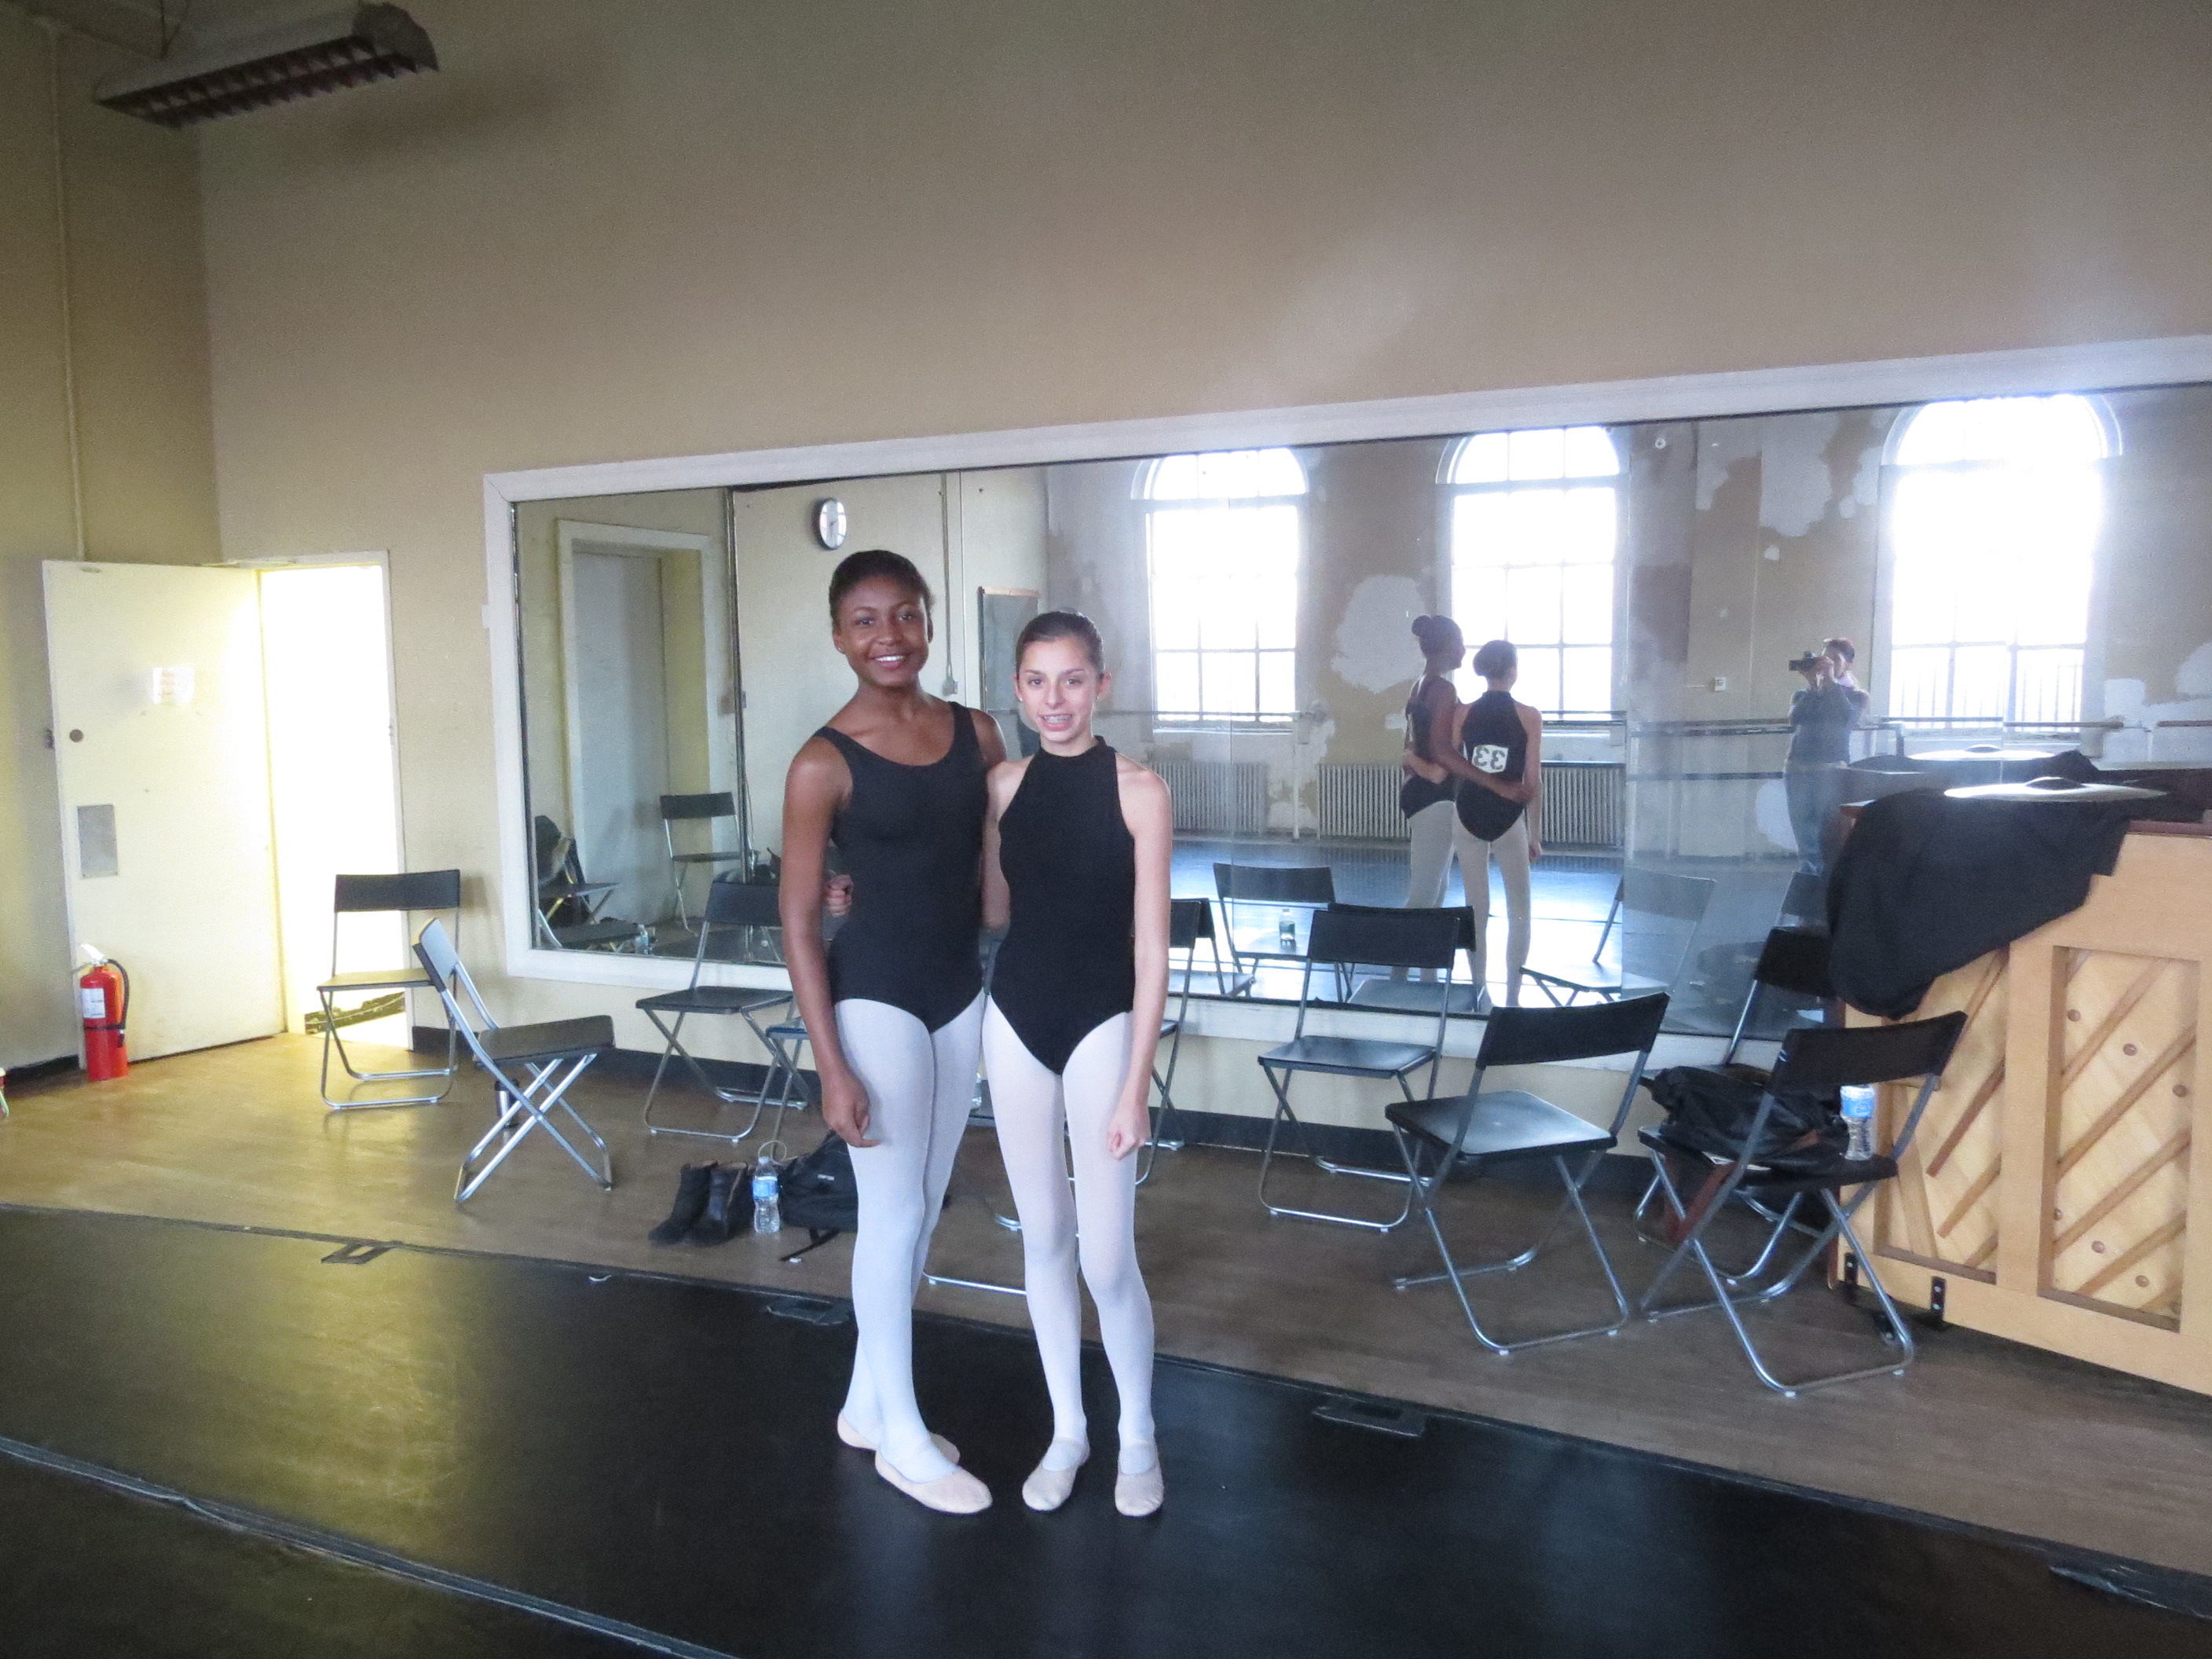 Gabriella with Janelle another dancer in studio on set of Imbalance.